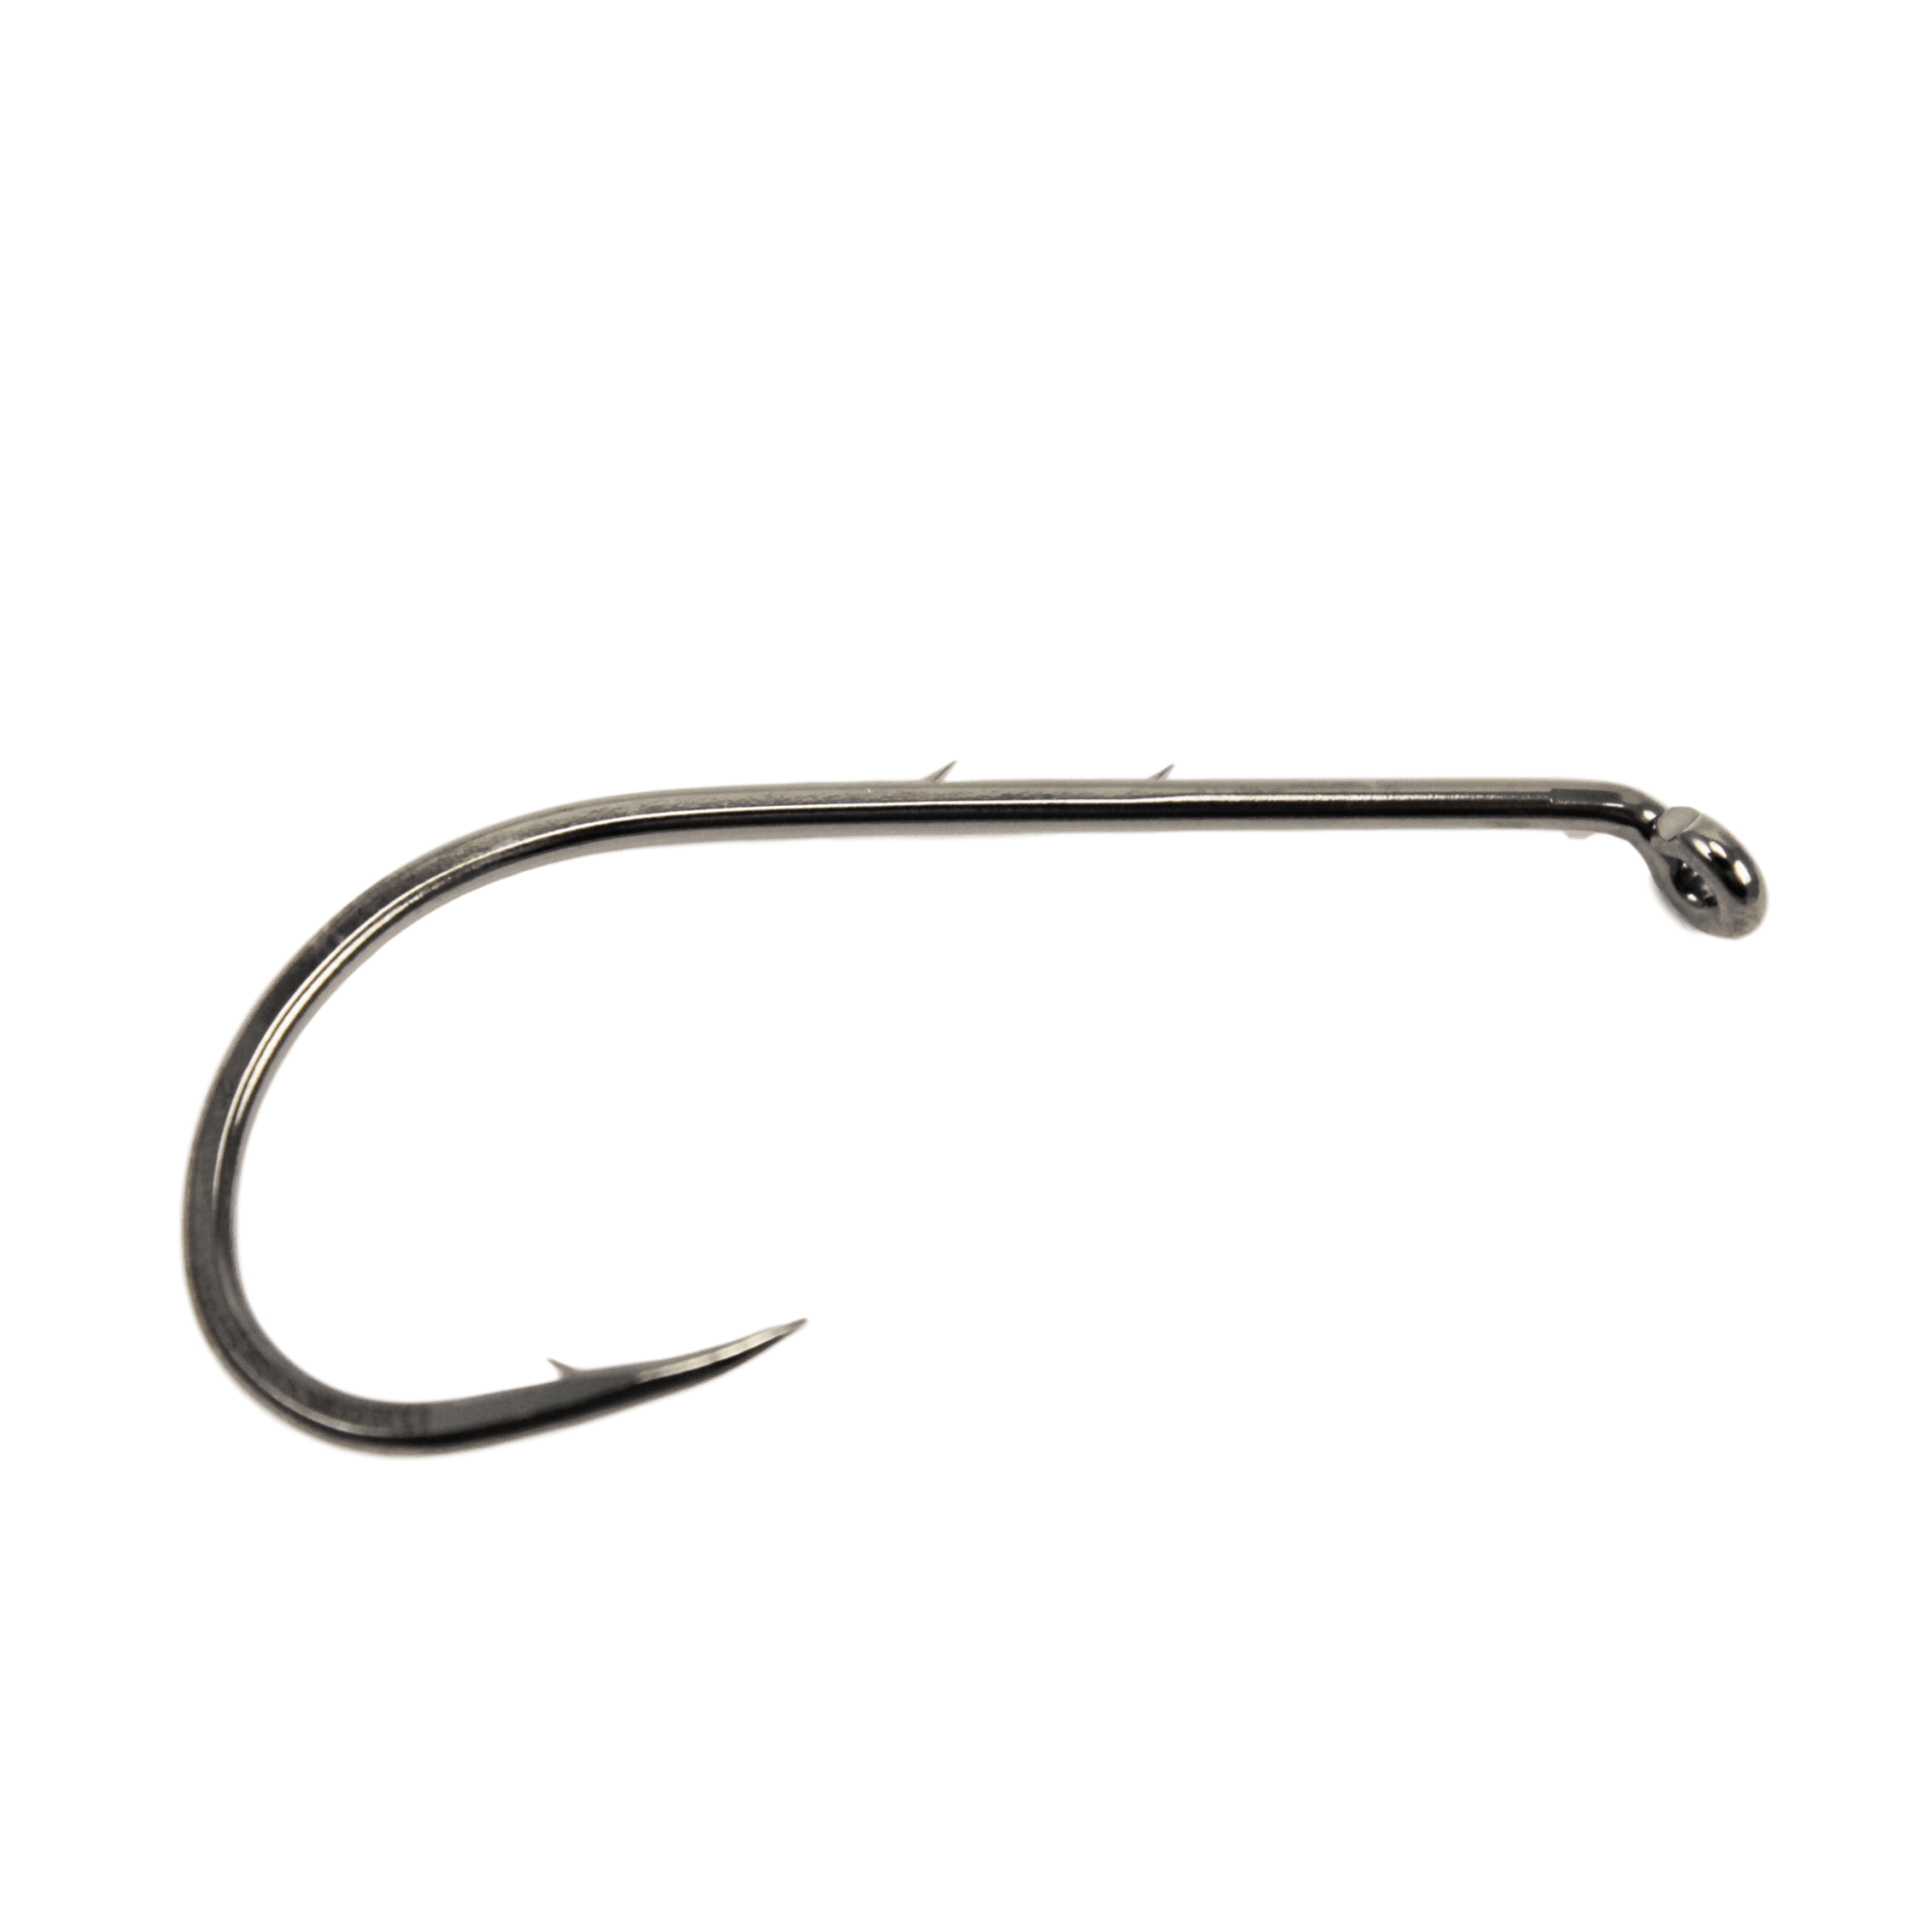 SAVE BIG on Gamakatsu Wire Guard Worm Hook Gamakatsu . You will find the  most effective products with great prices and excellent customer service